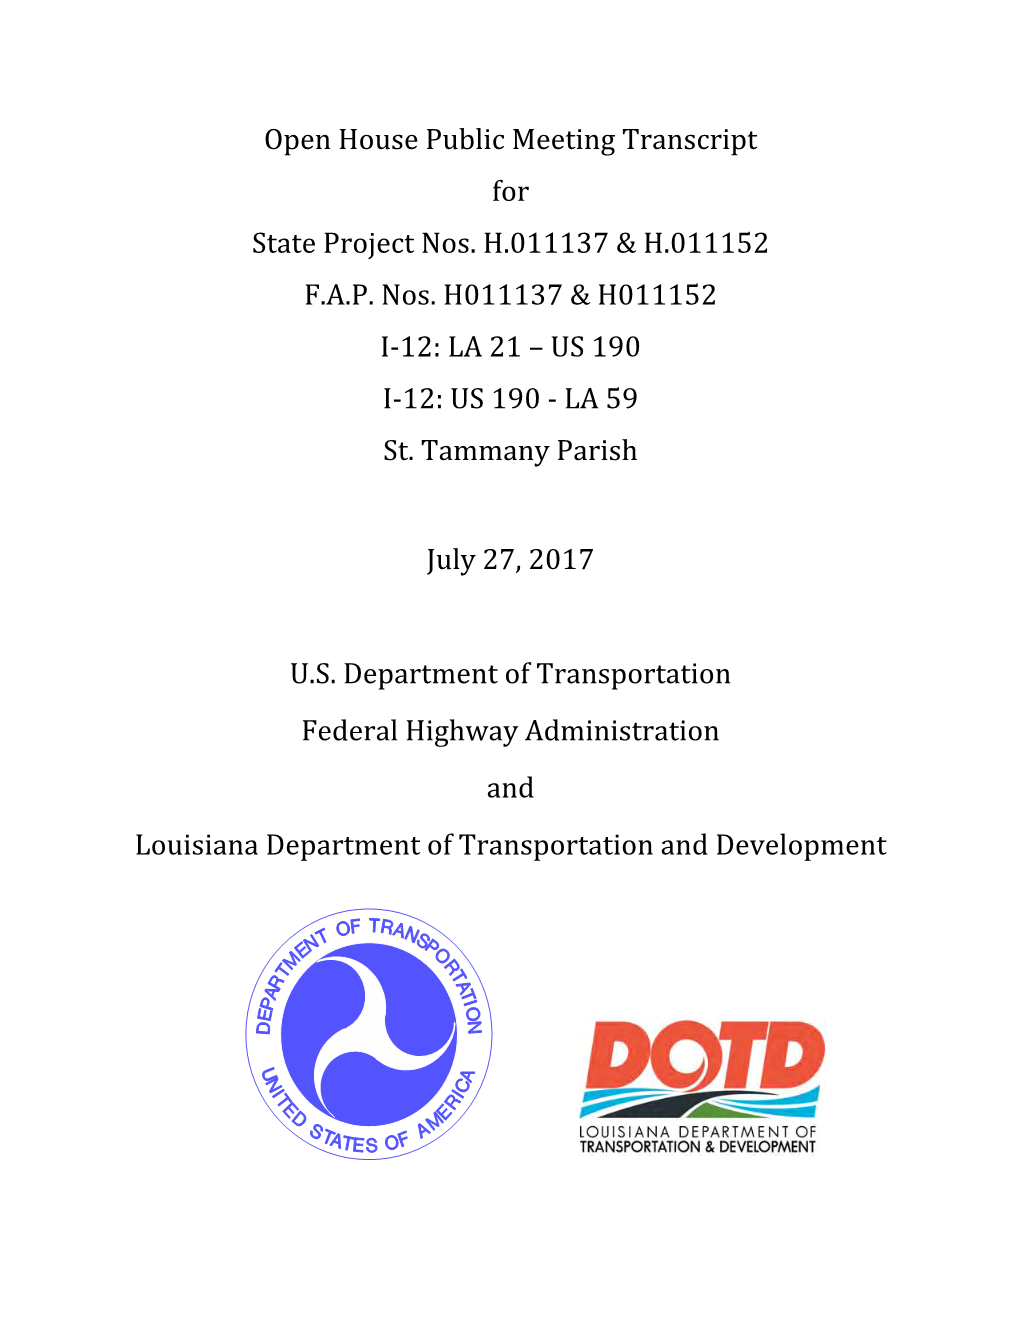 Open House Public Meeting Transcript for State Project Nos. H.011137 & H.011152 F.A.P